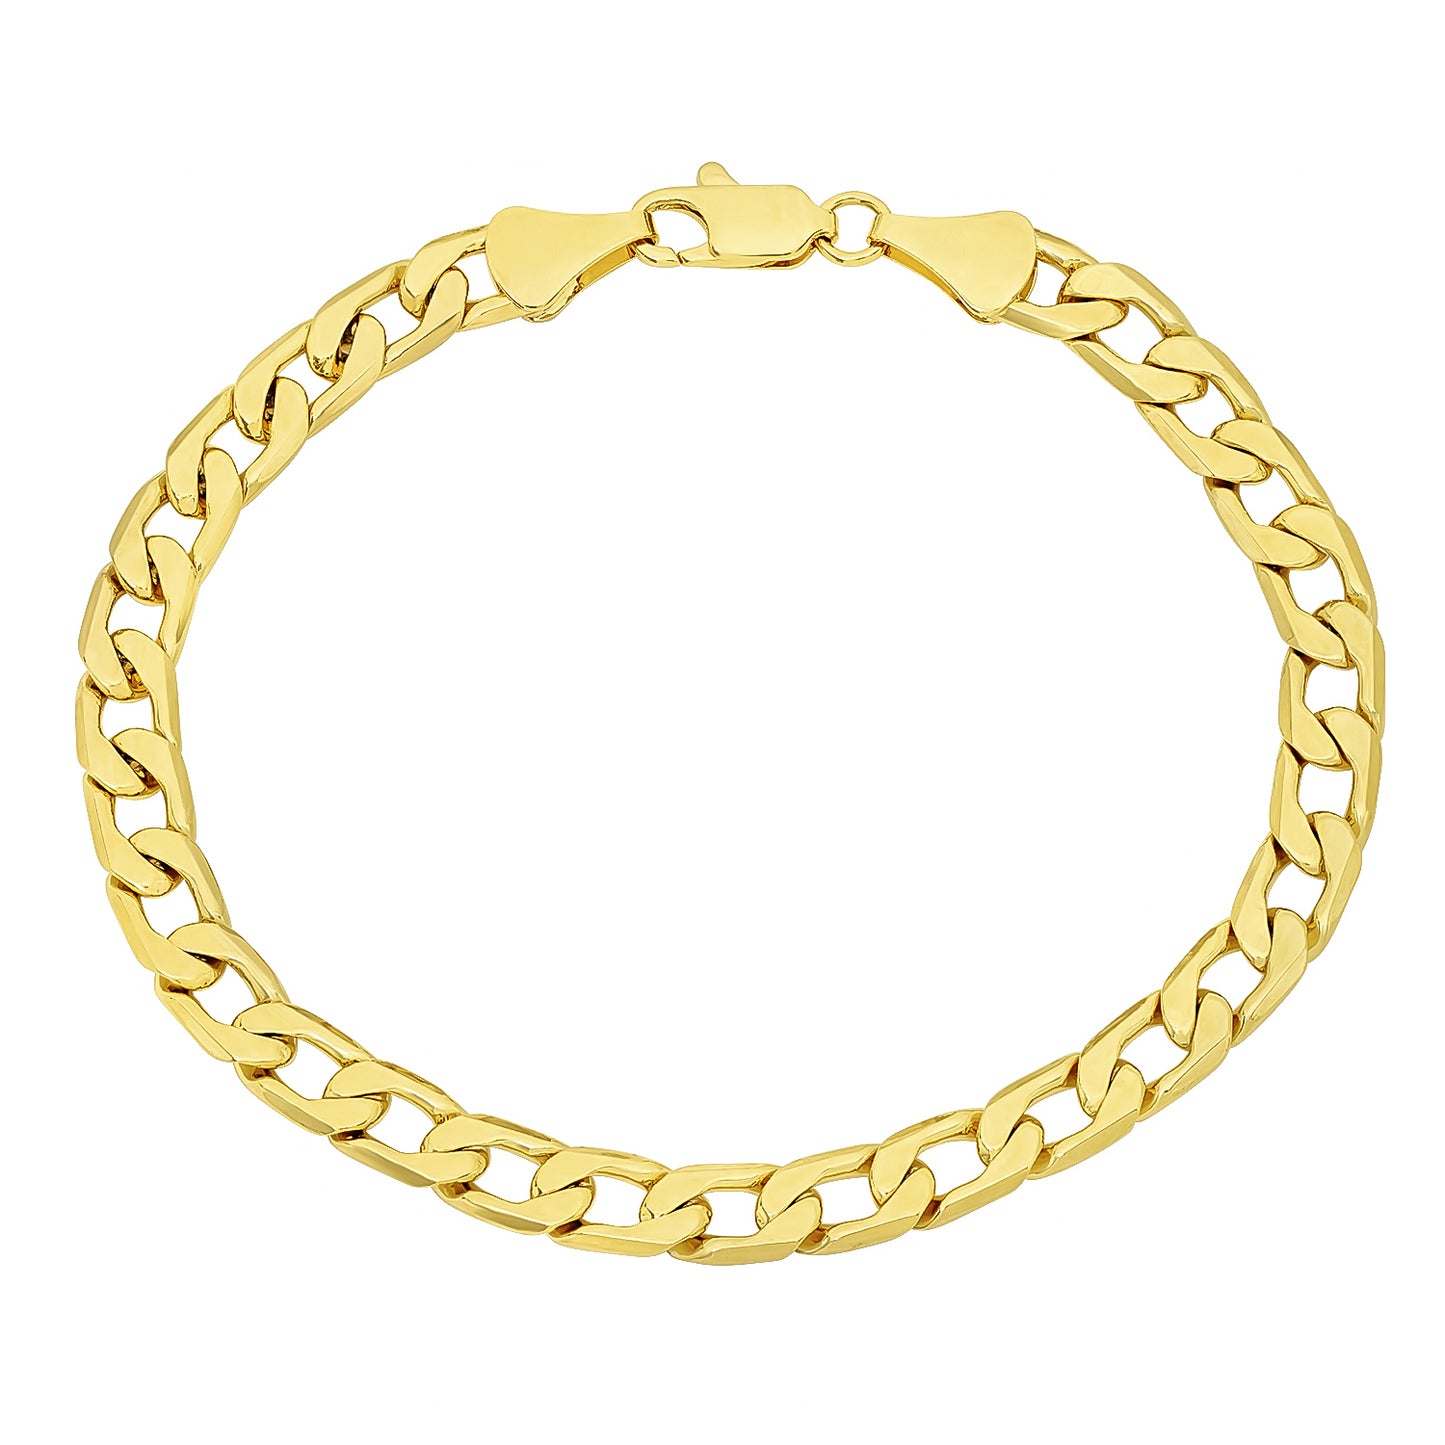 6mm 14k Yellow Gold Plated Flat Curb Chain Anklet (SKU: GL-CURB-ANKLETS)